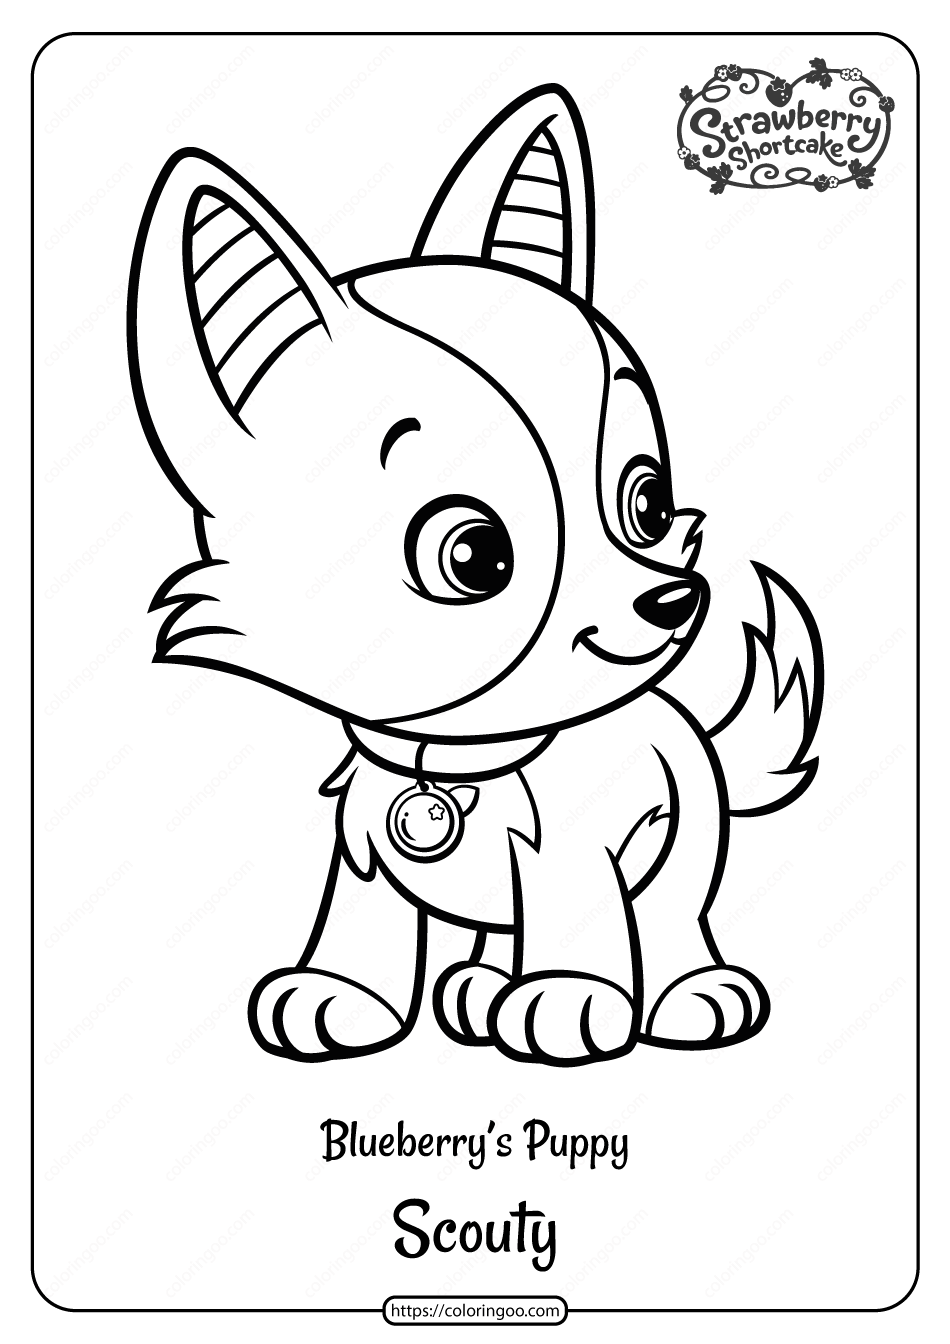 Printable Blueberry’s Puppy Scouty Pdf Coloring Page